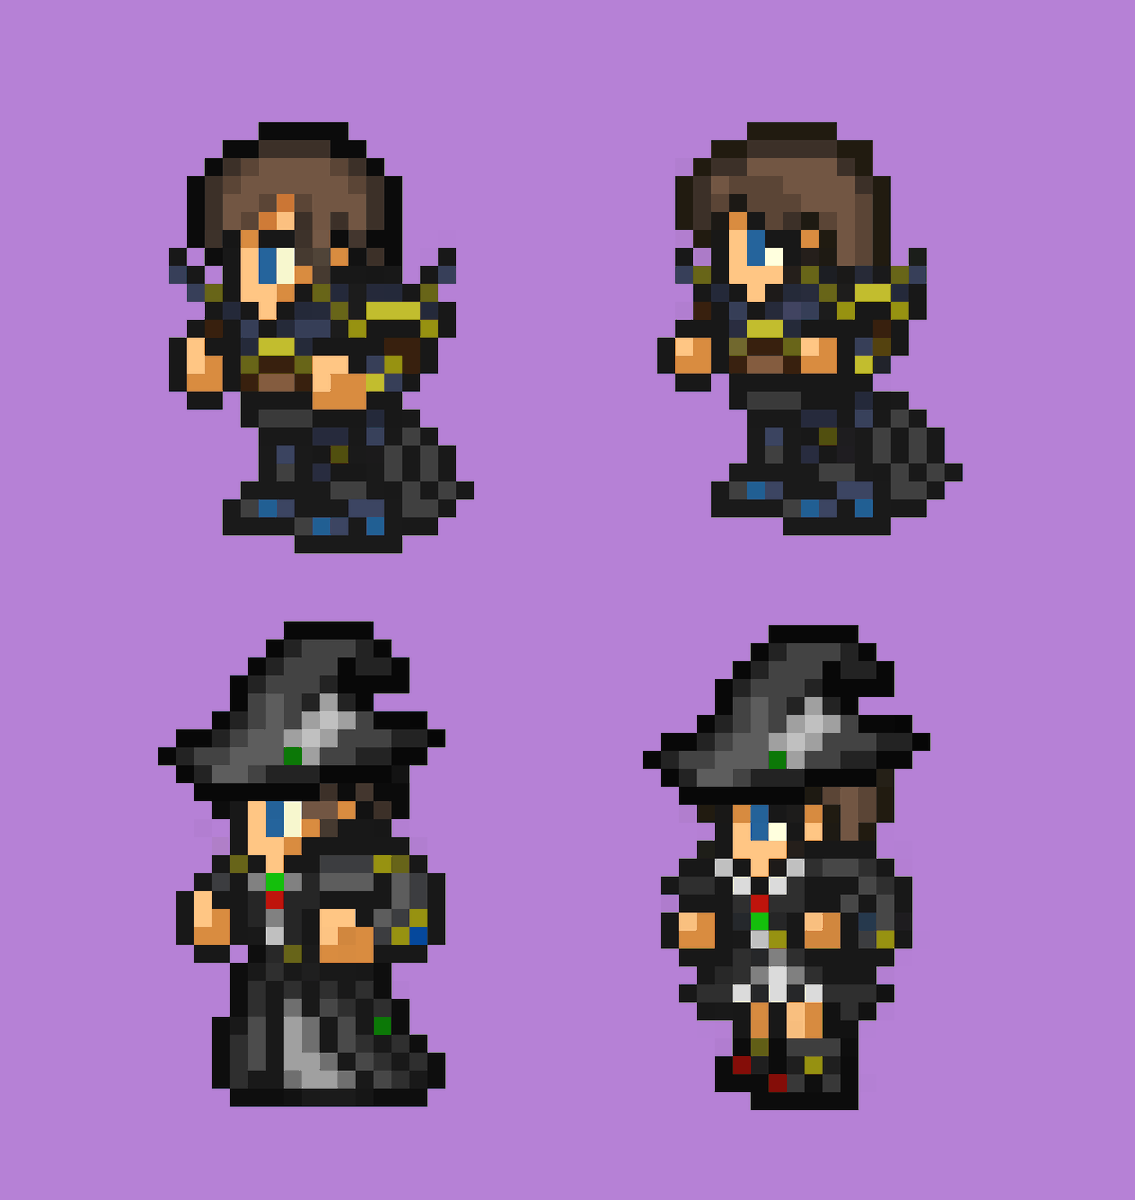 Welp, I'm not noticing a change in my reach. But that's alright -will keep grinding slowly but surely! 

Like by sharing these classic FF sprites I'm doing for a cool patron recently ^^ male and female WoLs in DRG and BLM SB AF sets! Phew that's alotta acronyms. #pixelart #FFXIV